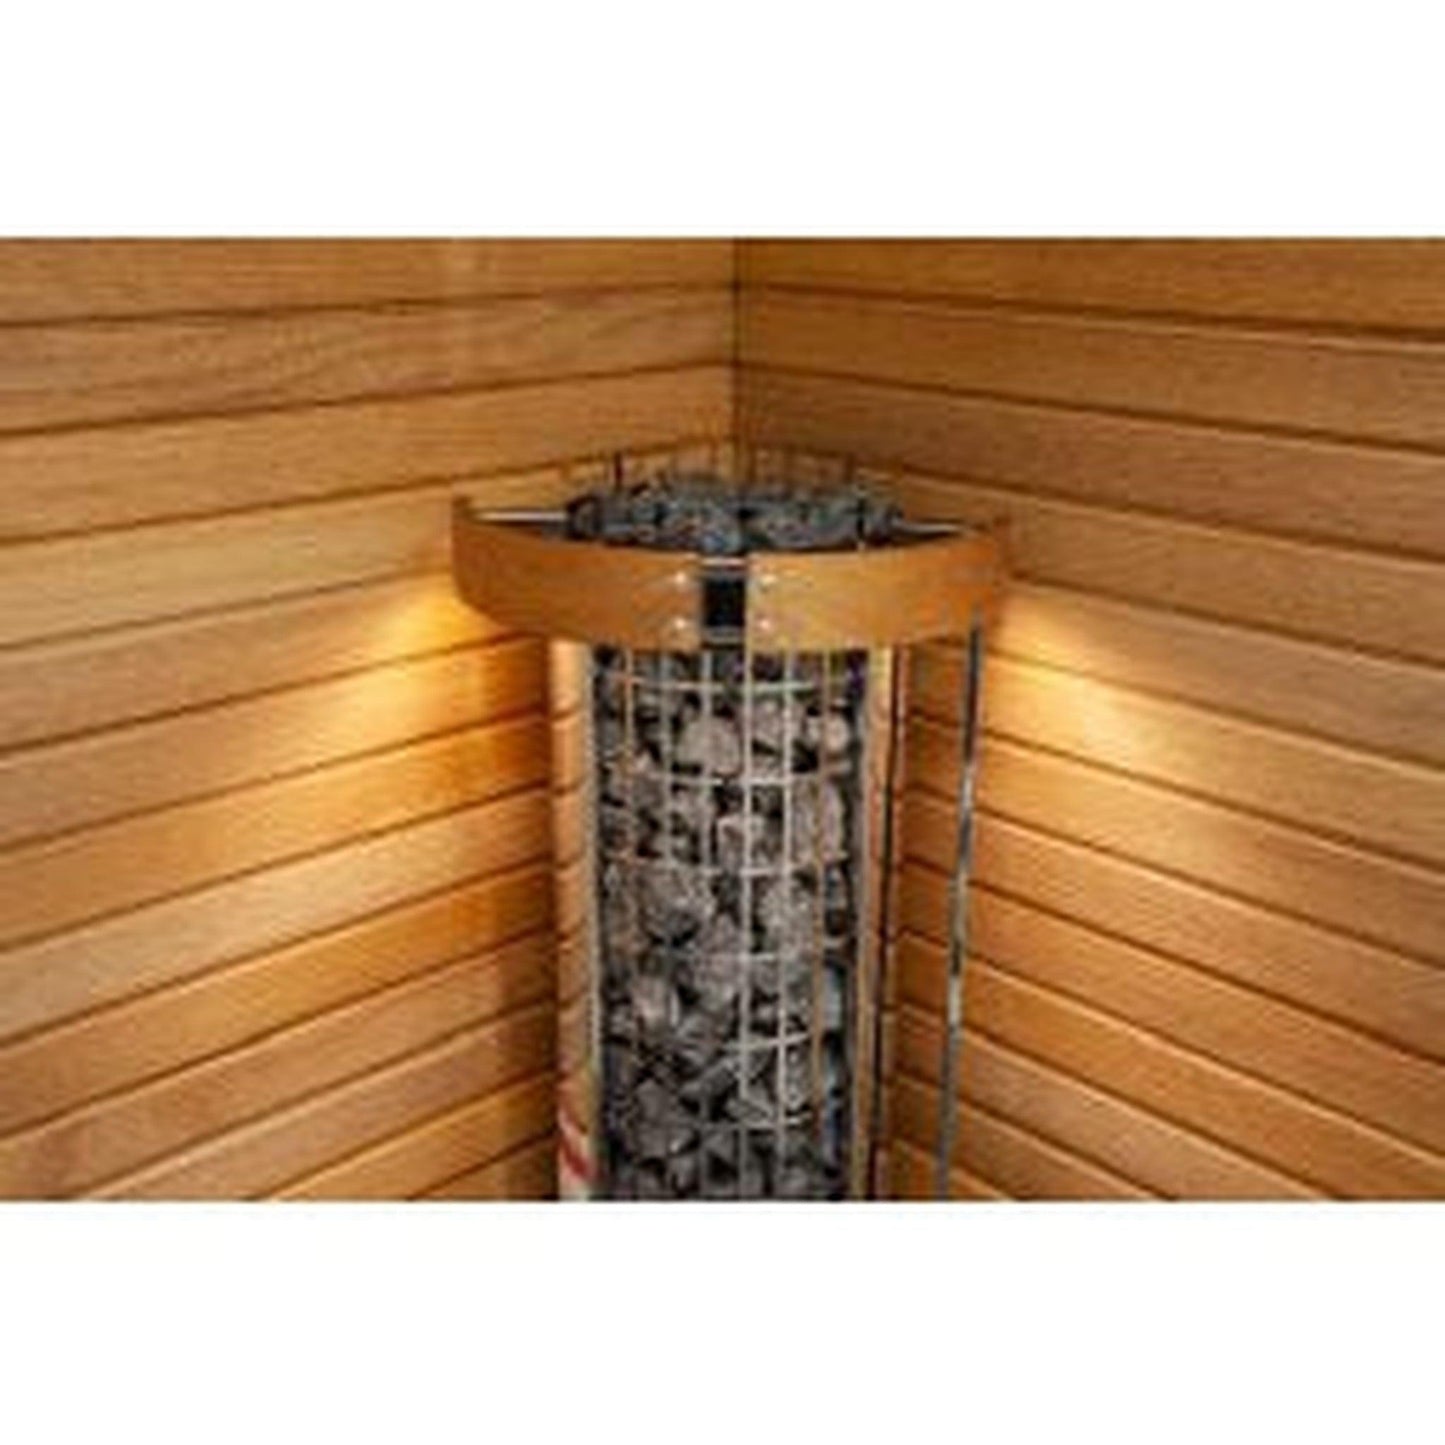 Harvia Cilindro Half Series 9 kW 240V 1PH Freestanding Stainless Steel Electric Sauna Heater With Built-In Timer and Temperature Control